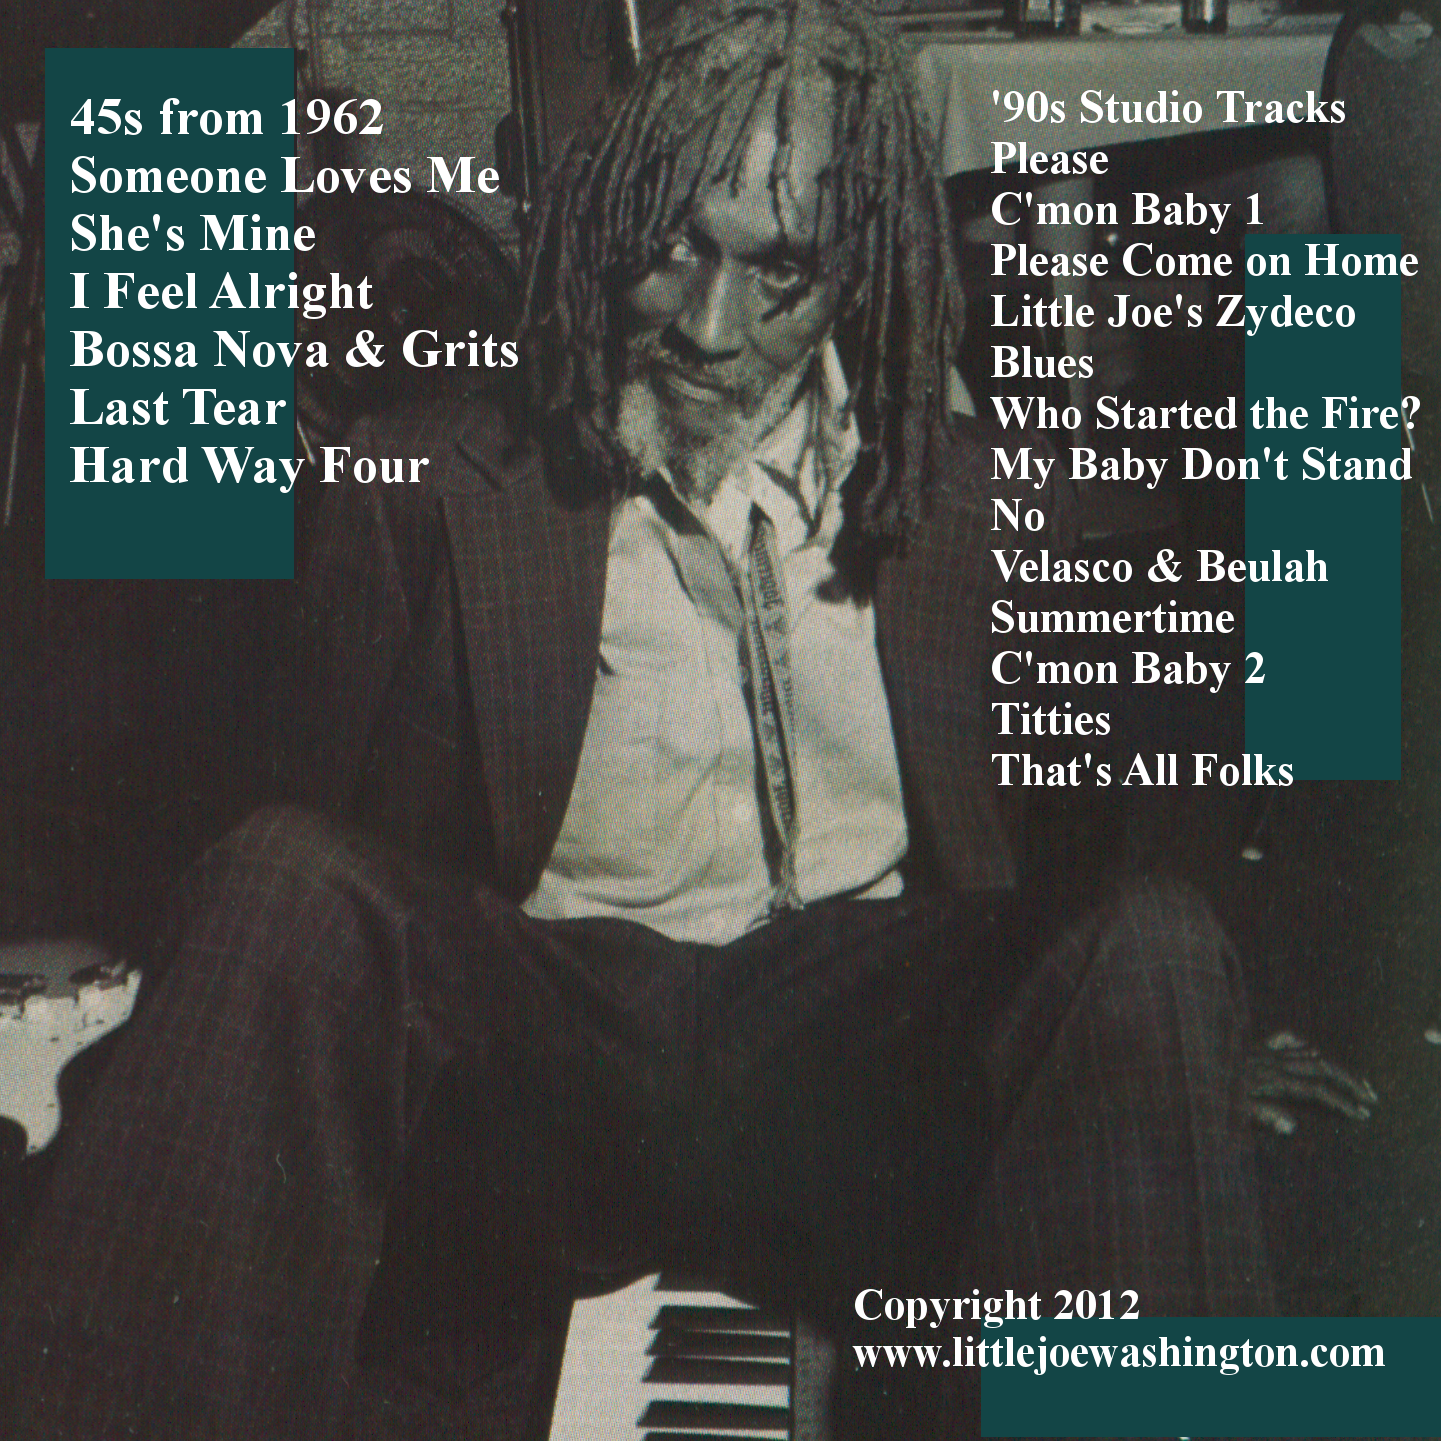 Little Joe Washington CD Then and Now Inside Cover